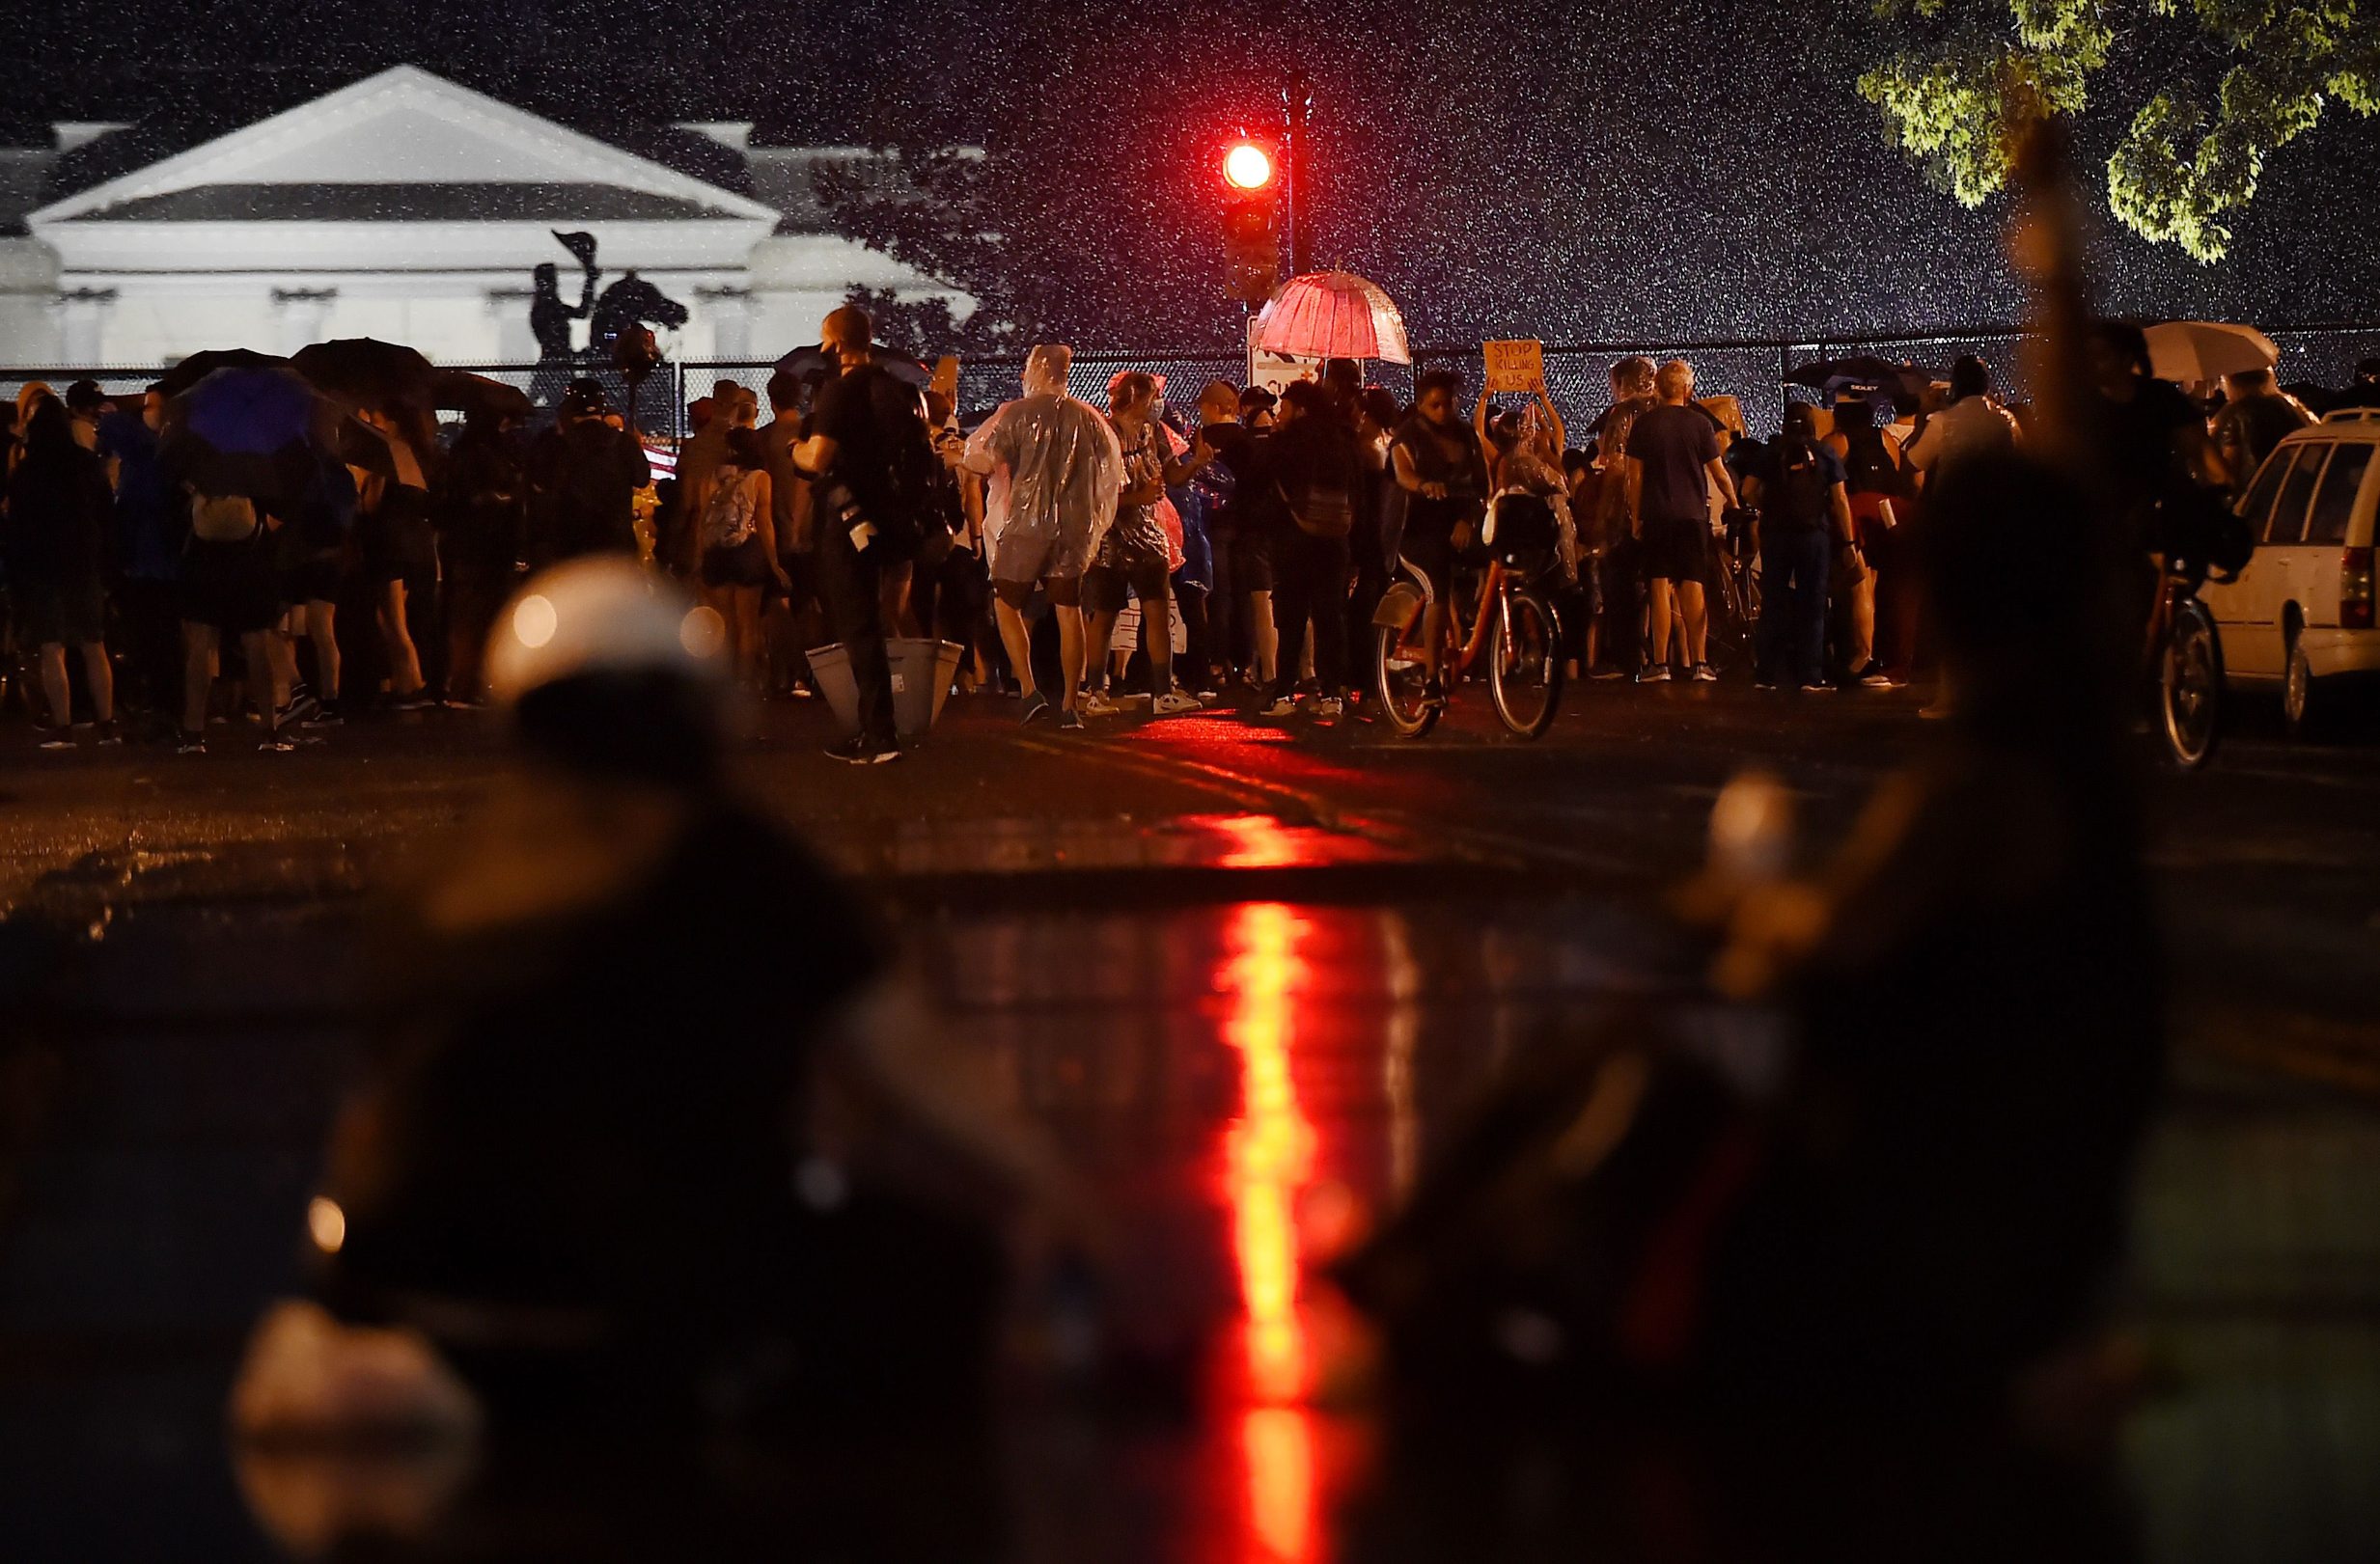 Protesters stand in the rain in front of Lafayette park near the White House to protest the death of George Floyd, who died in police custody in Minneapolis on June 4, 2020 in Washington, DC. - On May 25, 2020, Floyd, a 46-year-old black man suspected of passing a counterfeit  bill, died in Minneapolis after Derek Chauvin, a white police officer, pressed his knee to Floyd's neck for almost nine minutes. (Photo by Olivier DOULIERY / AFP)